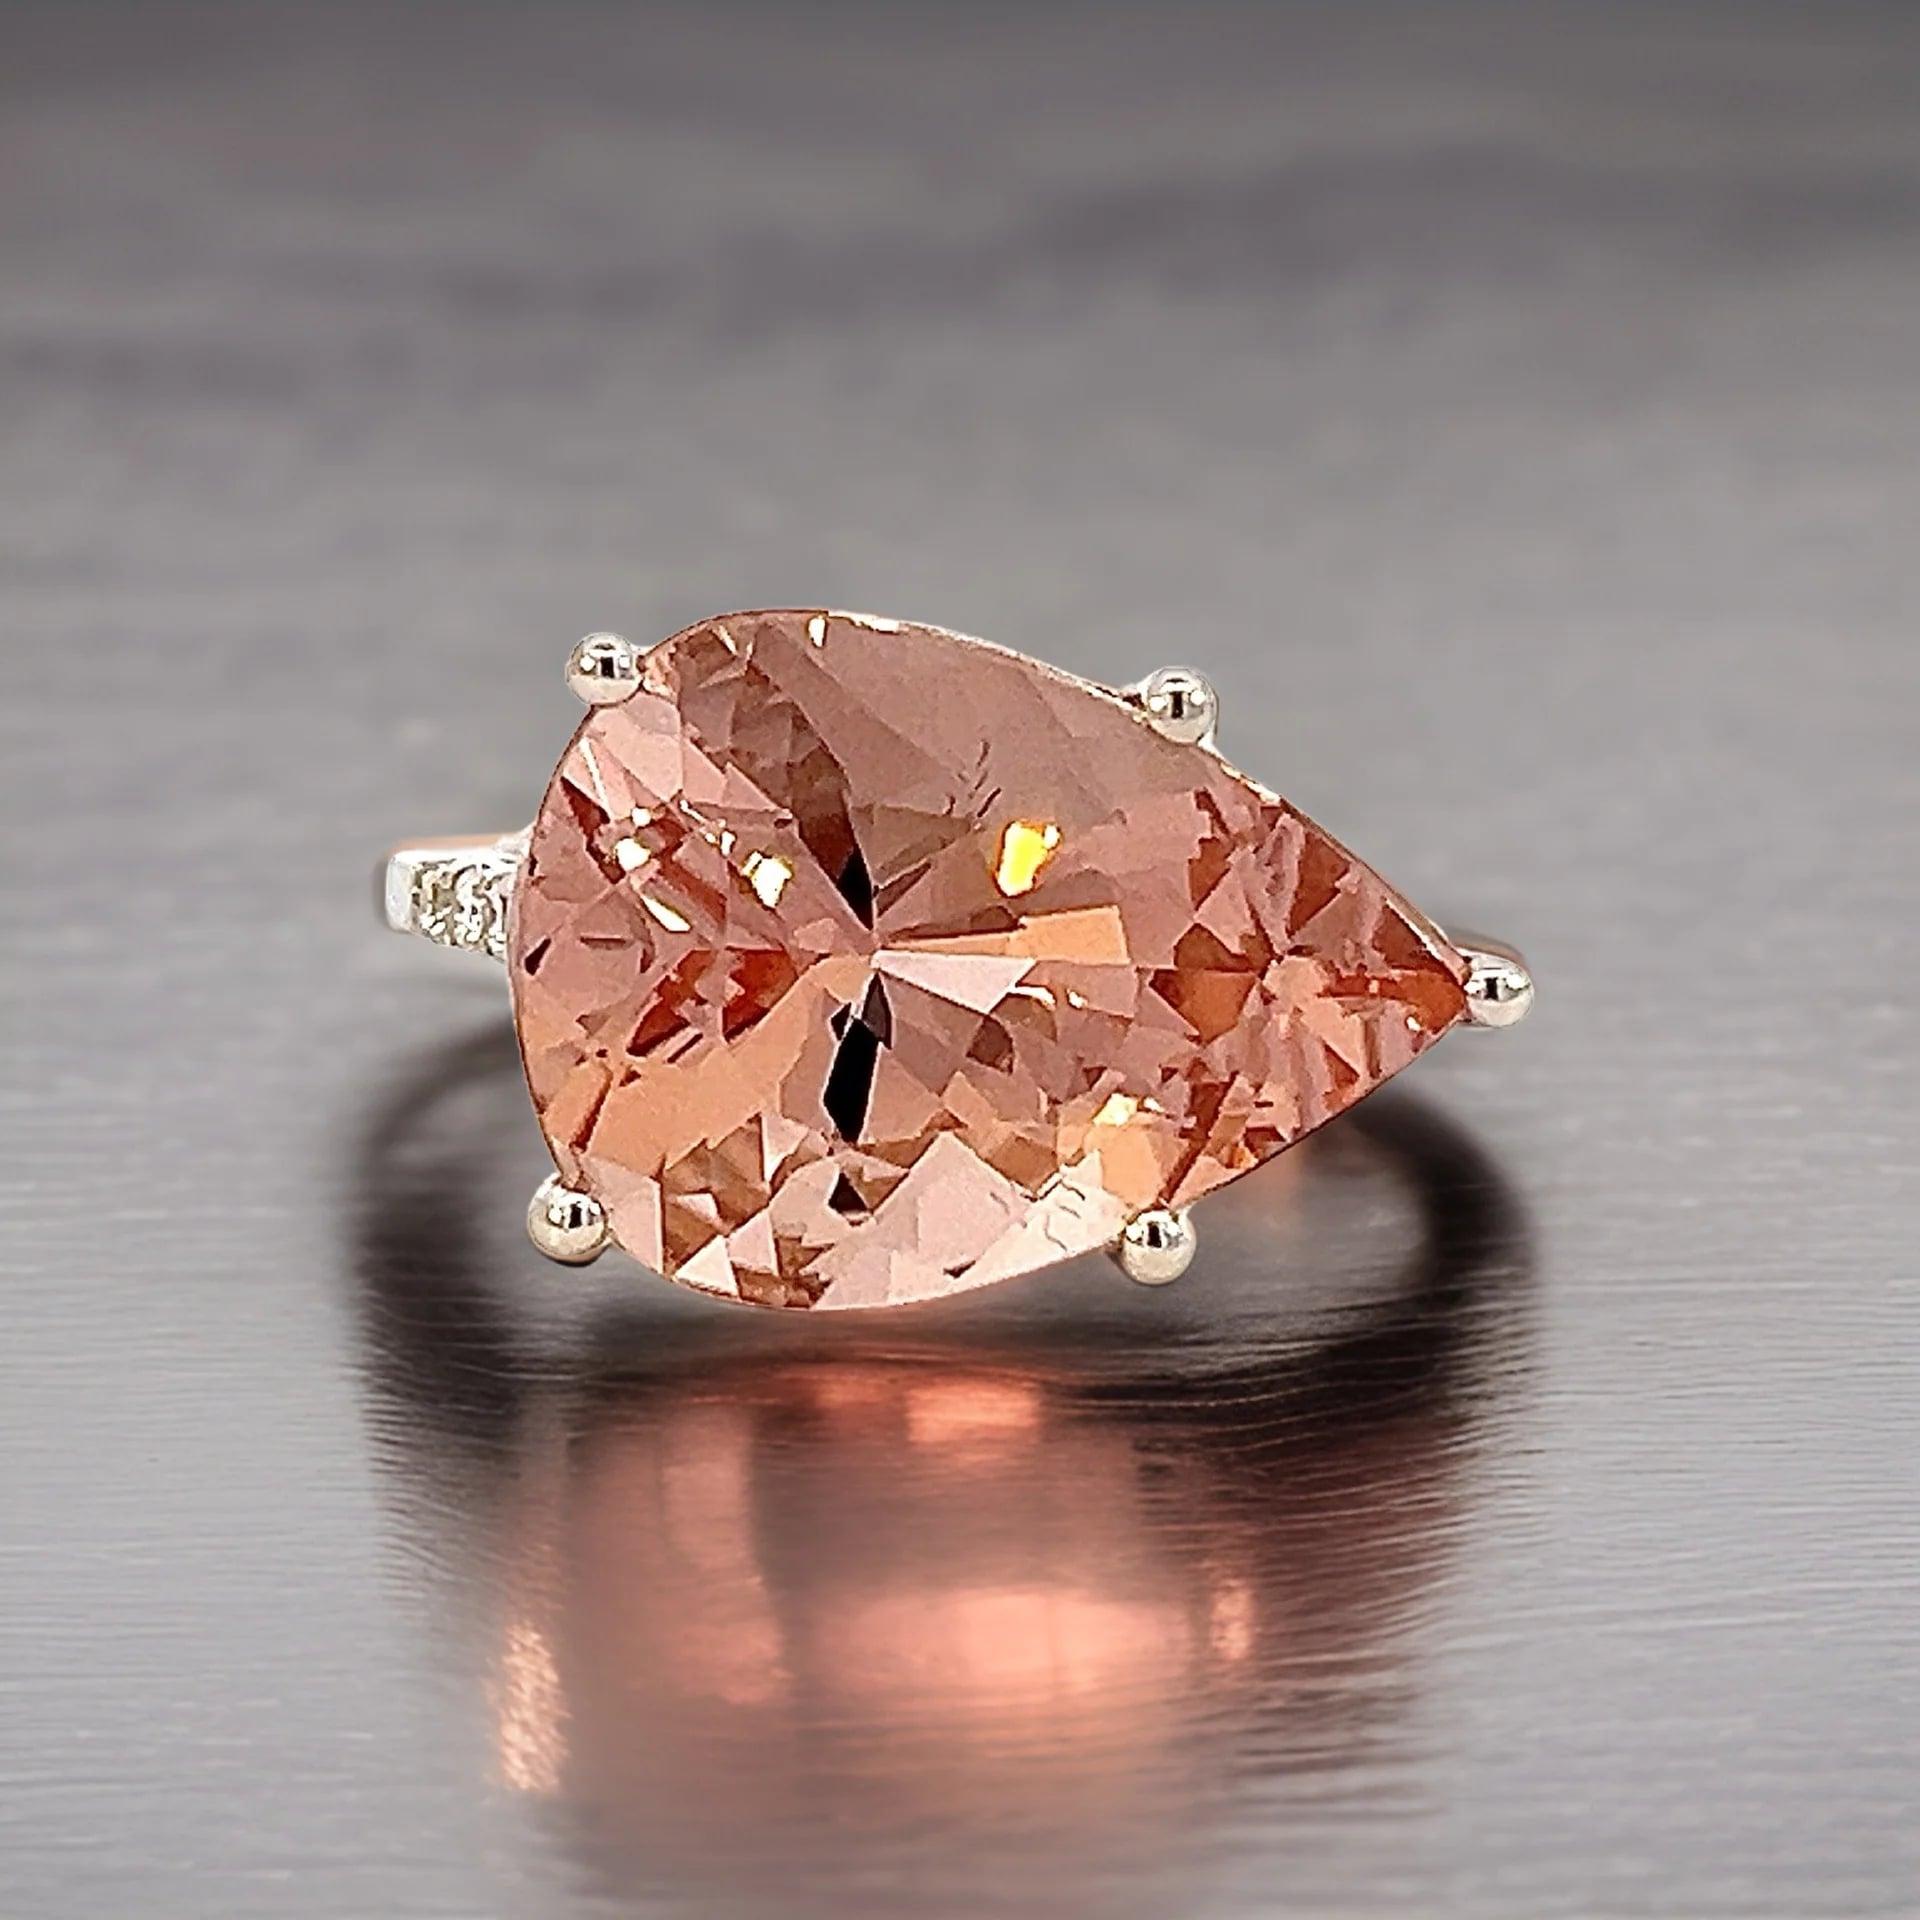 Pear Cut Natural Morganite Diamond Ring 6.5 14k White Gold 8.99 TCW Certified  For Sale